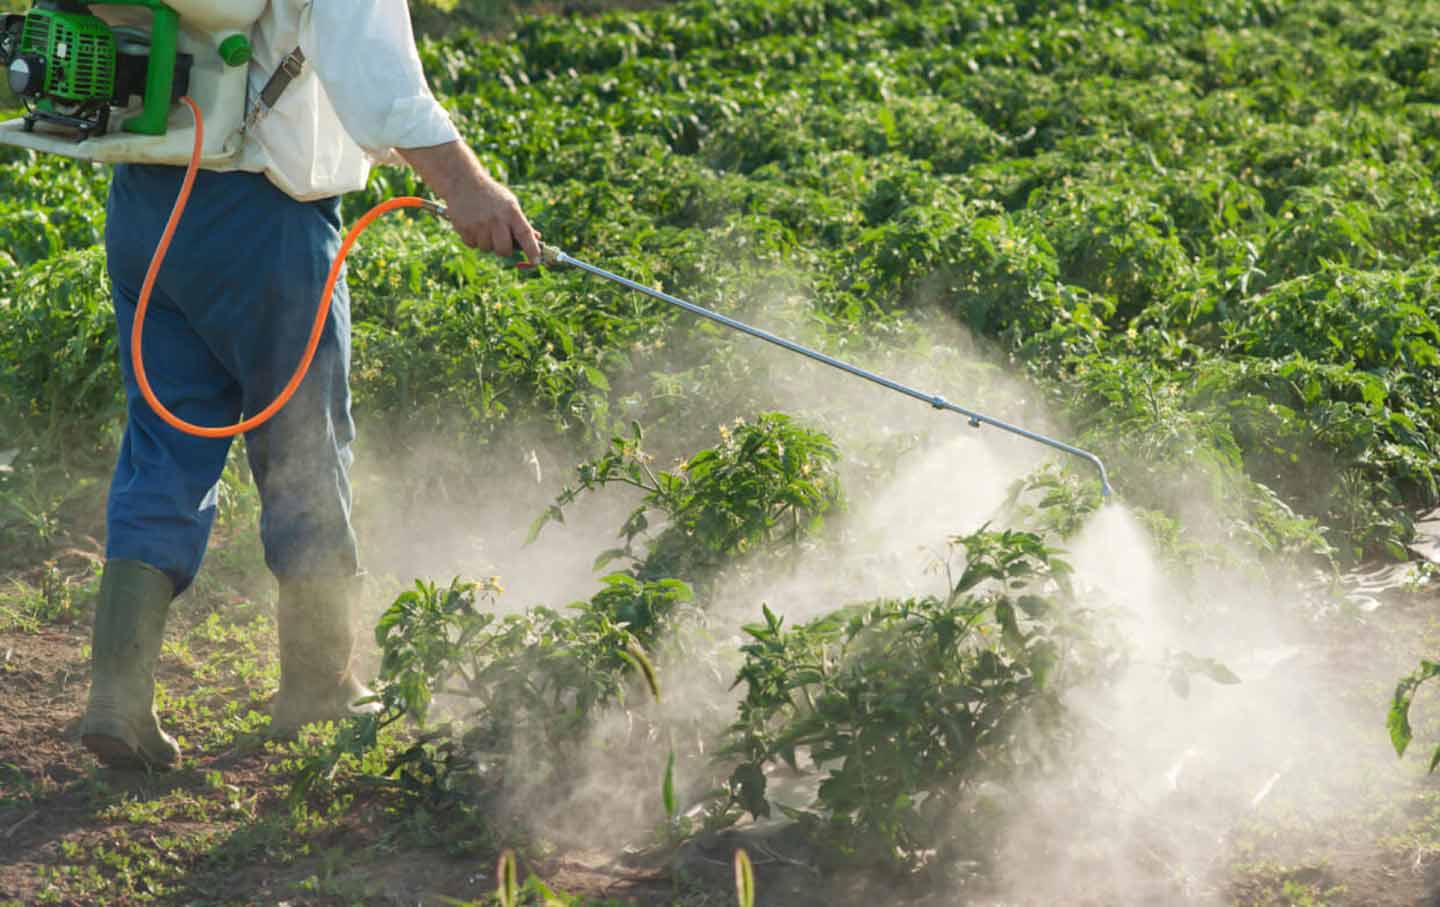 More Than 90 Percent of Americans Have Pesticides or Their Byproducts in Their Bodies